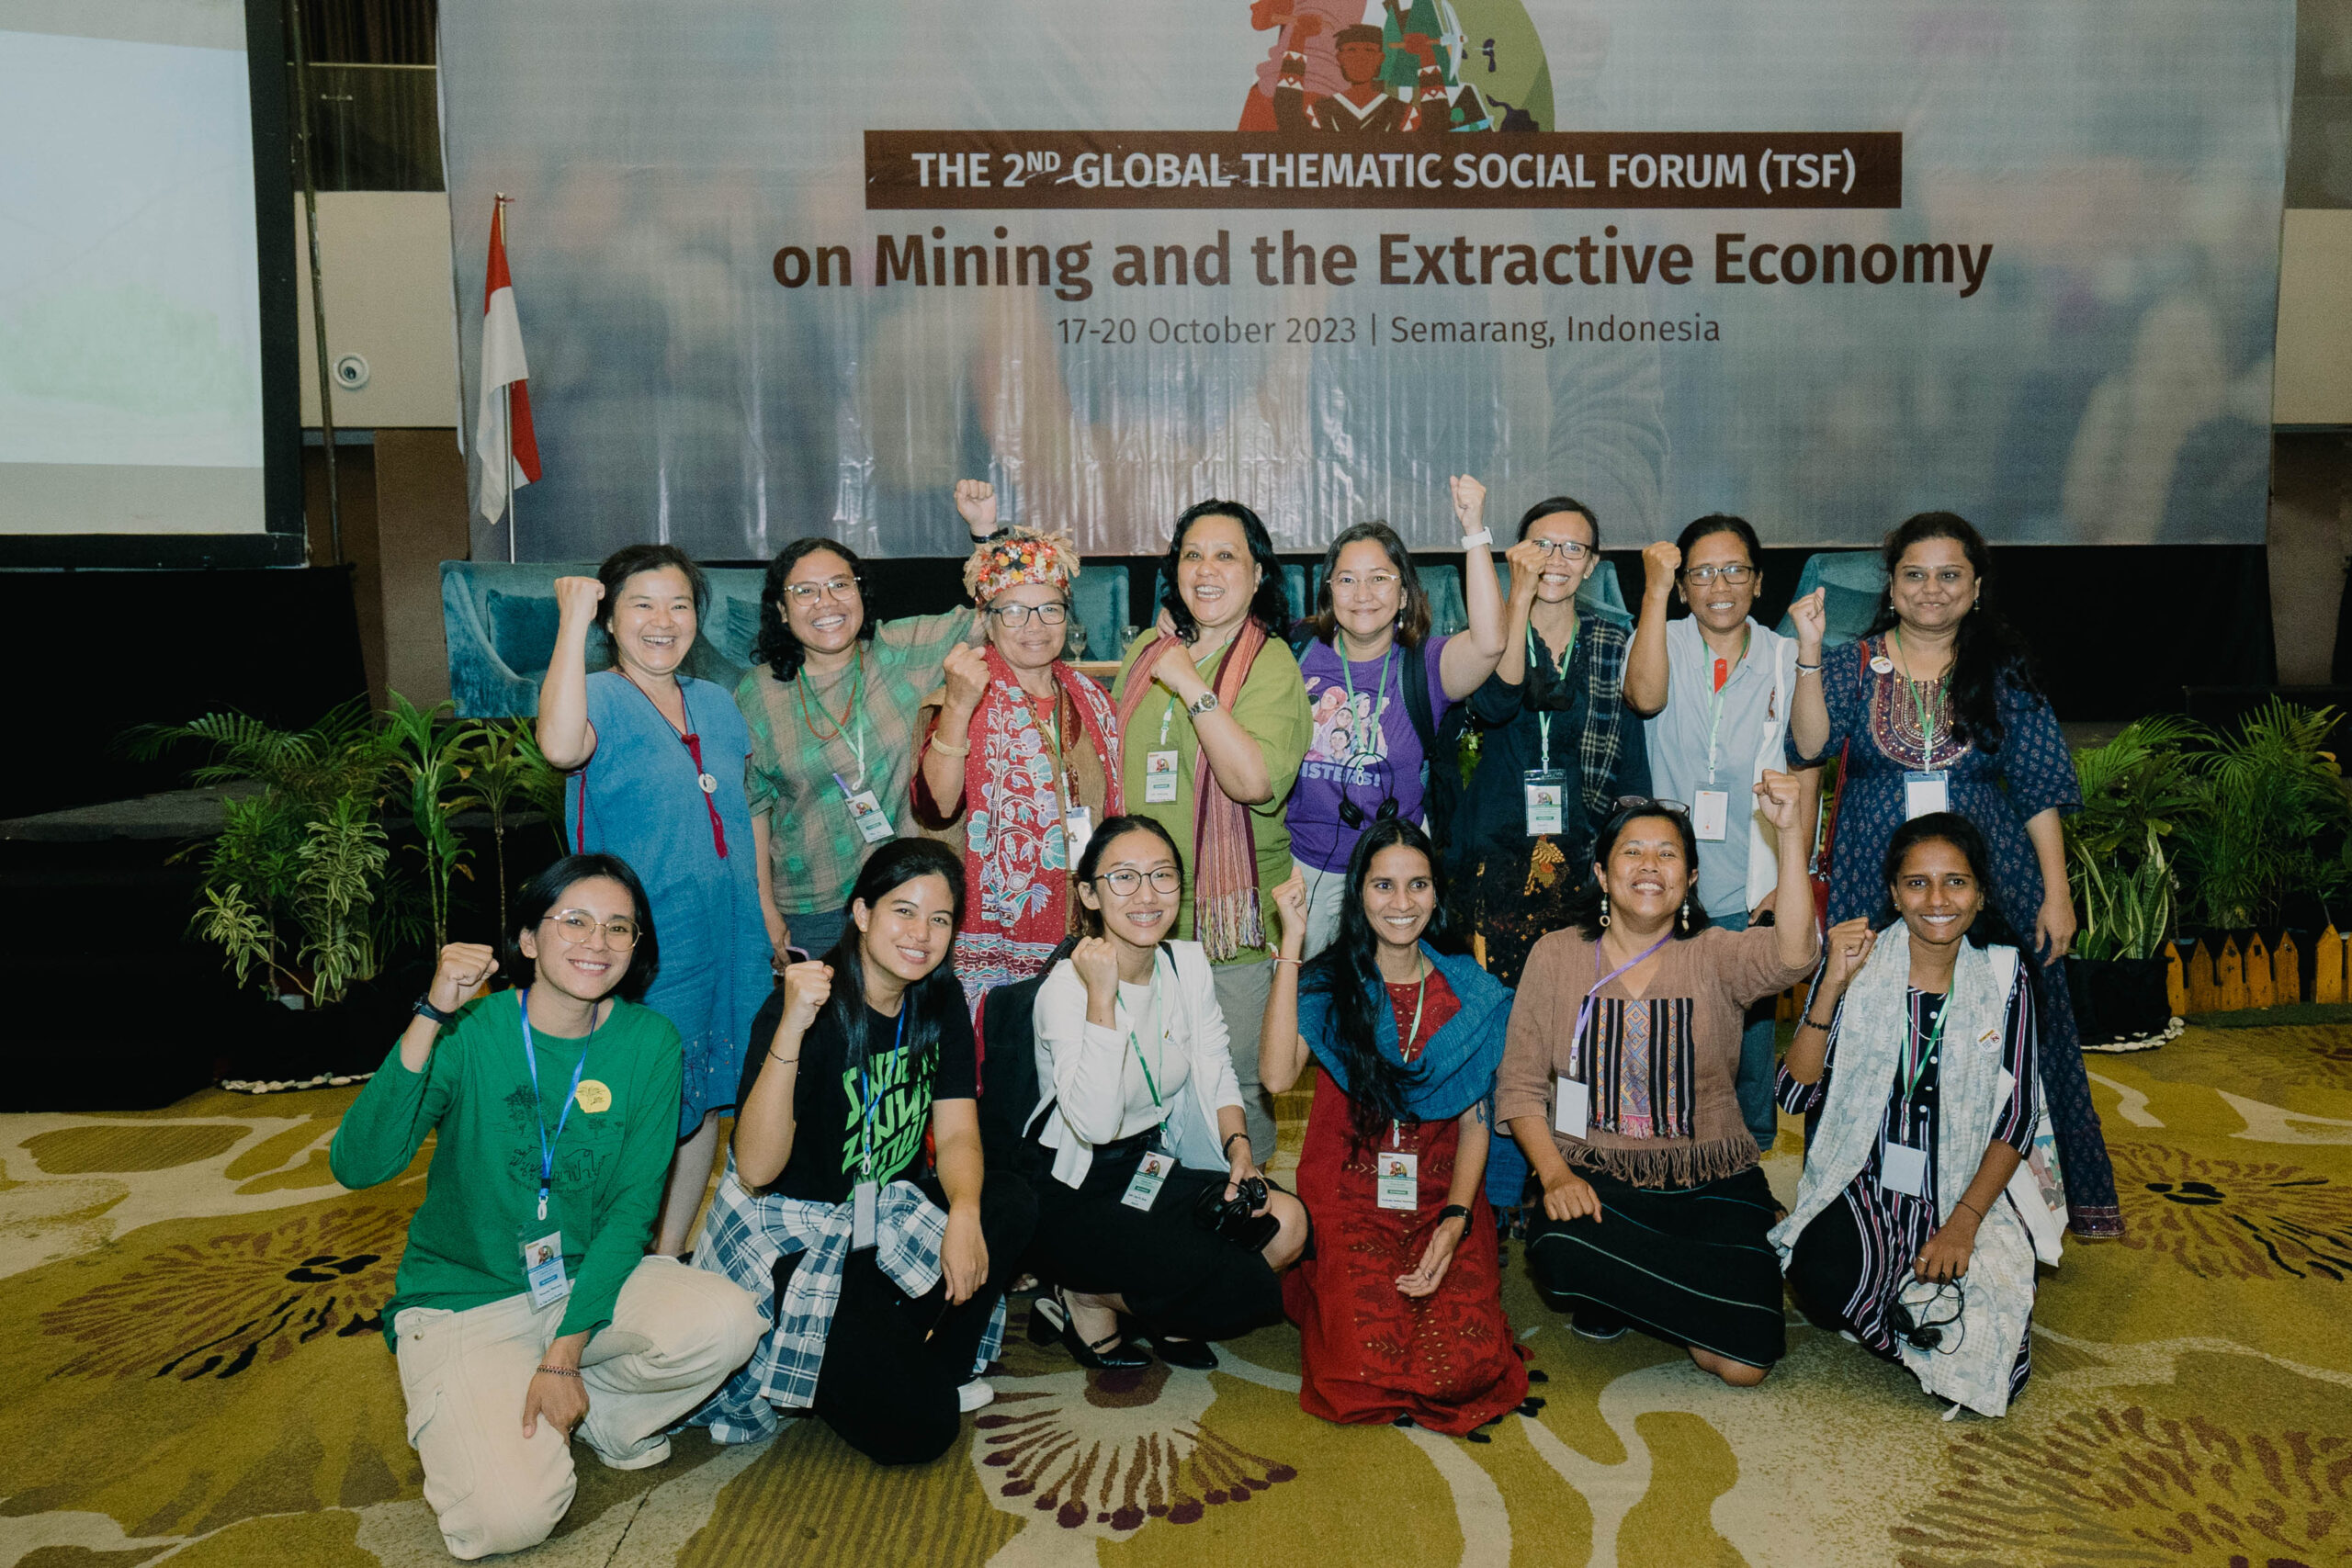 Participants at the TSF-Mining listening to the Plenary on Testimonies & Perspectives About Just Transition from Indigenous Peoples, Local Communities, Workers, Fisherfolk and Peasants